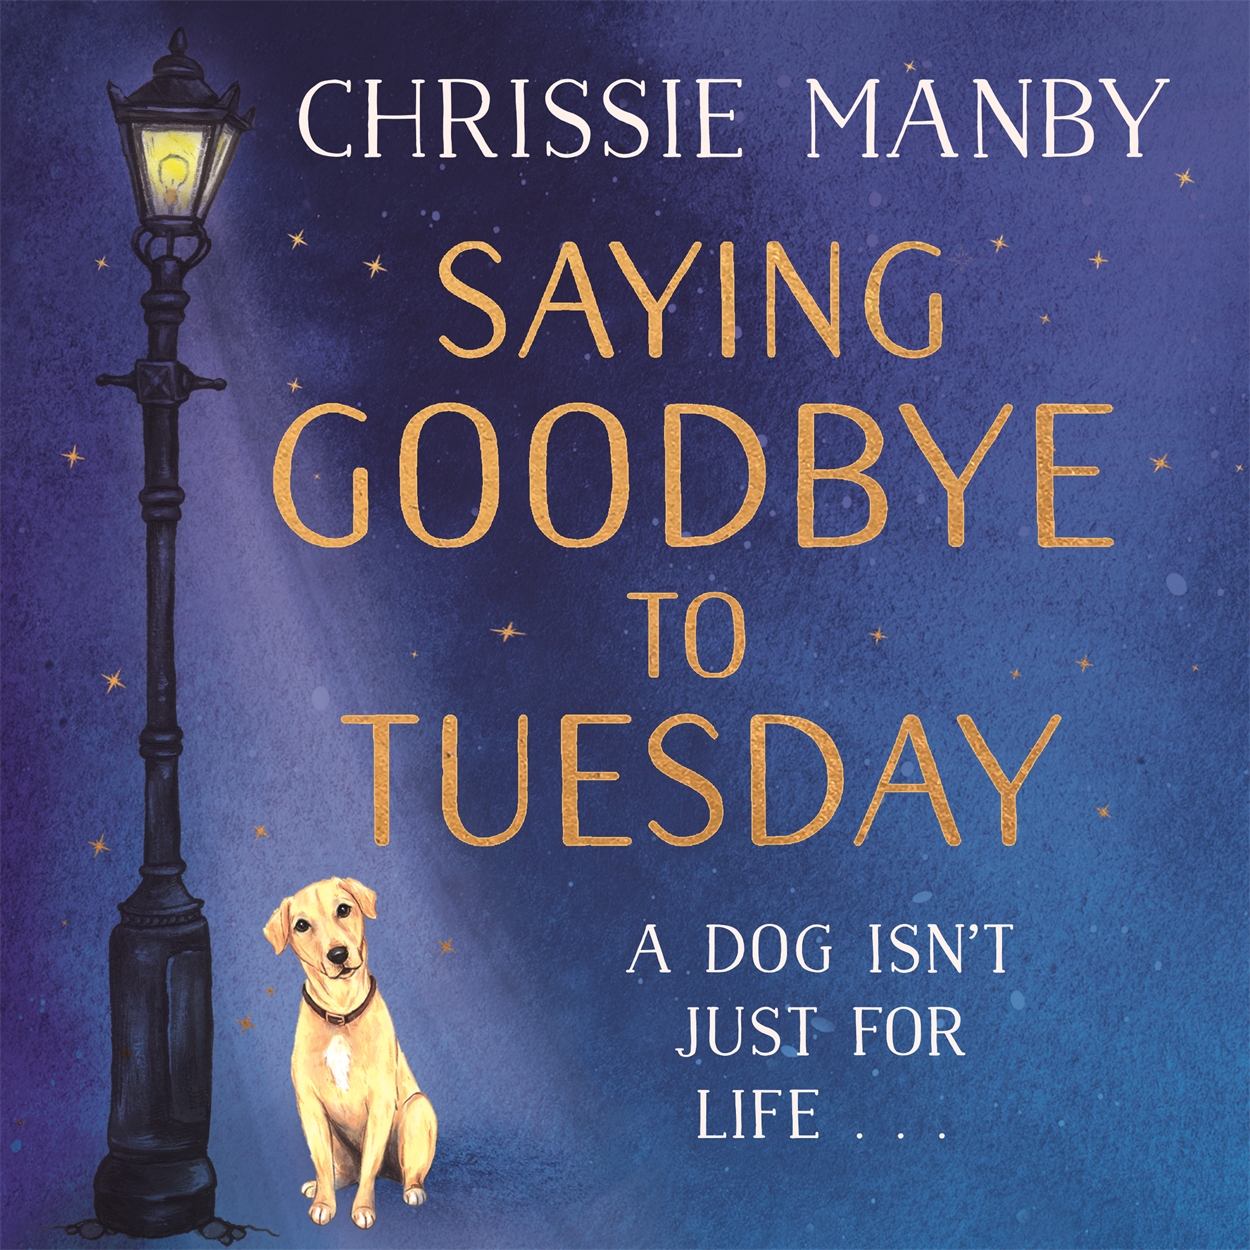 Just In Case by Chrissie Manby